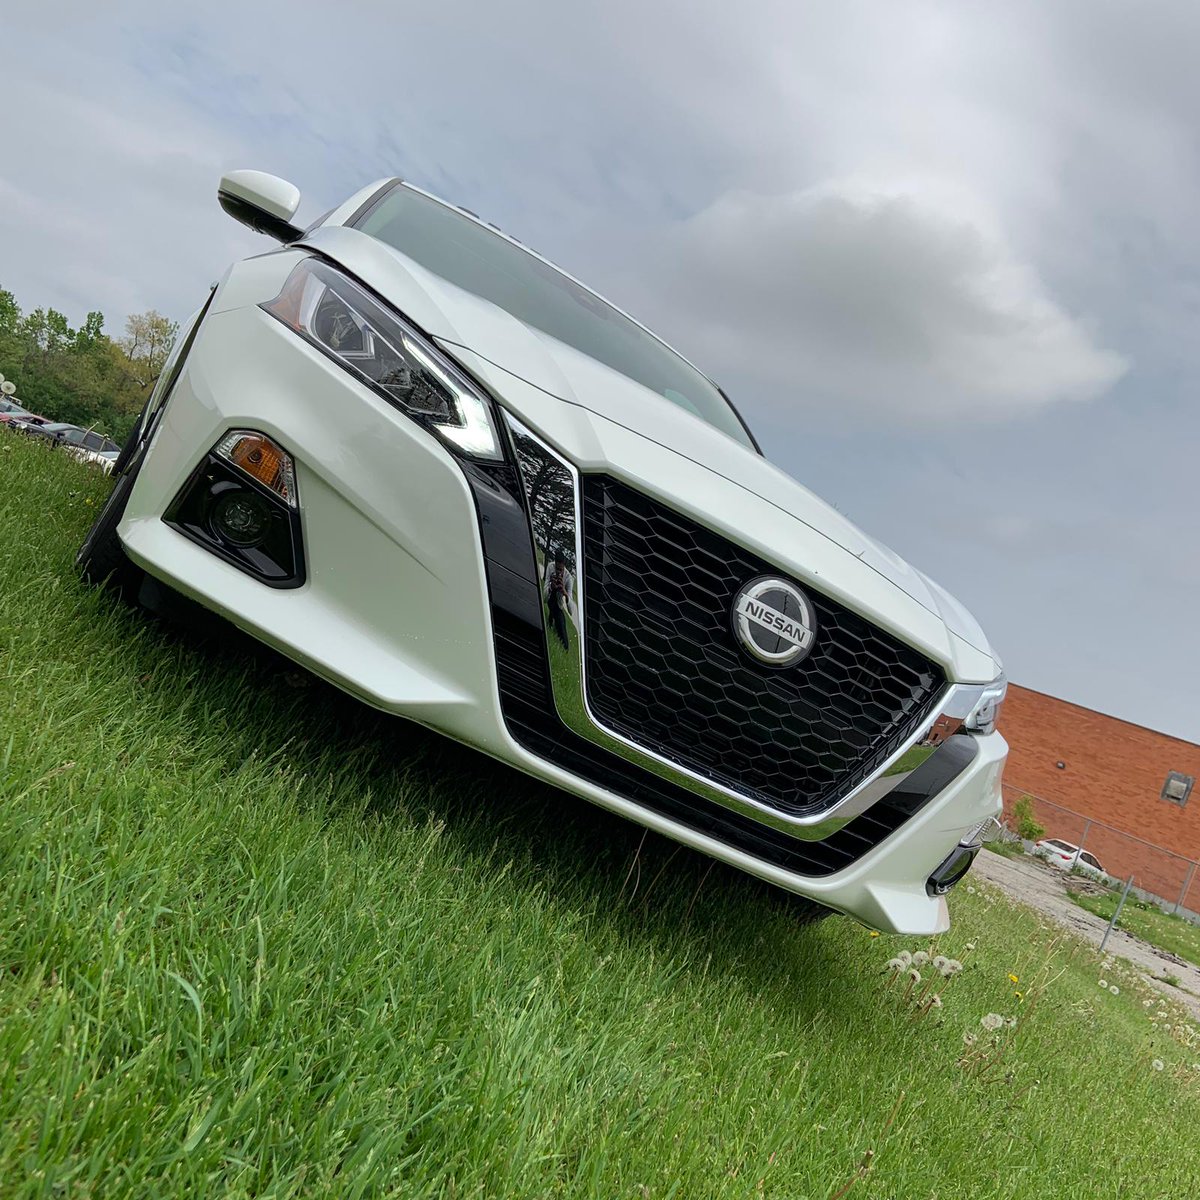 Staring right into your soul. #NissanAltima
_
#NissanFanFeature